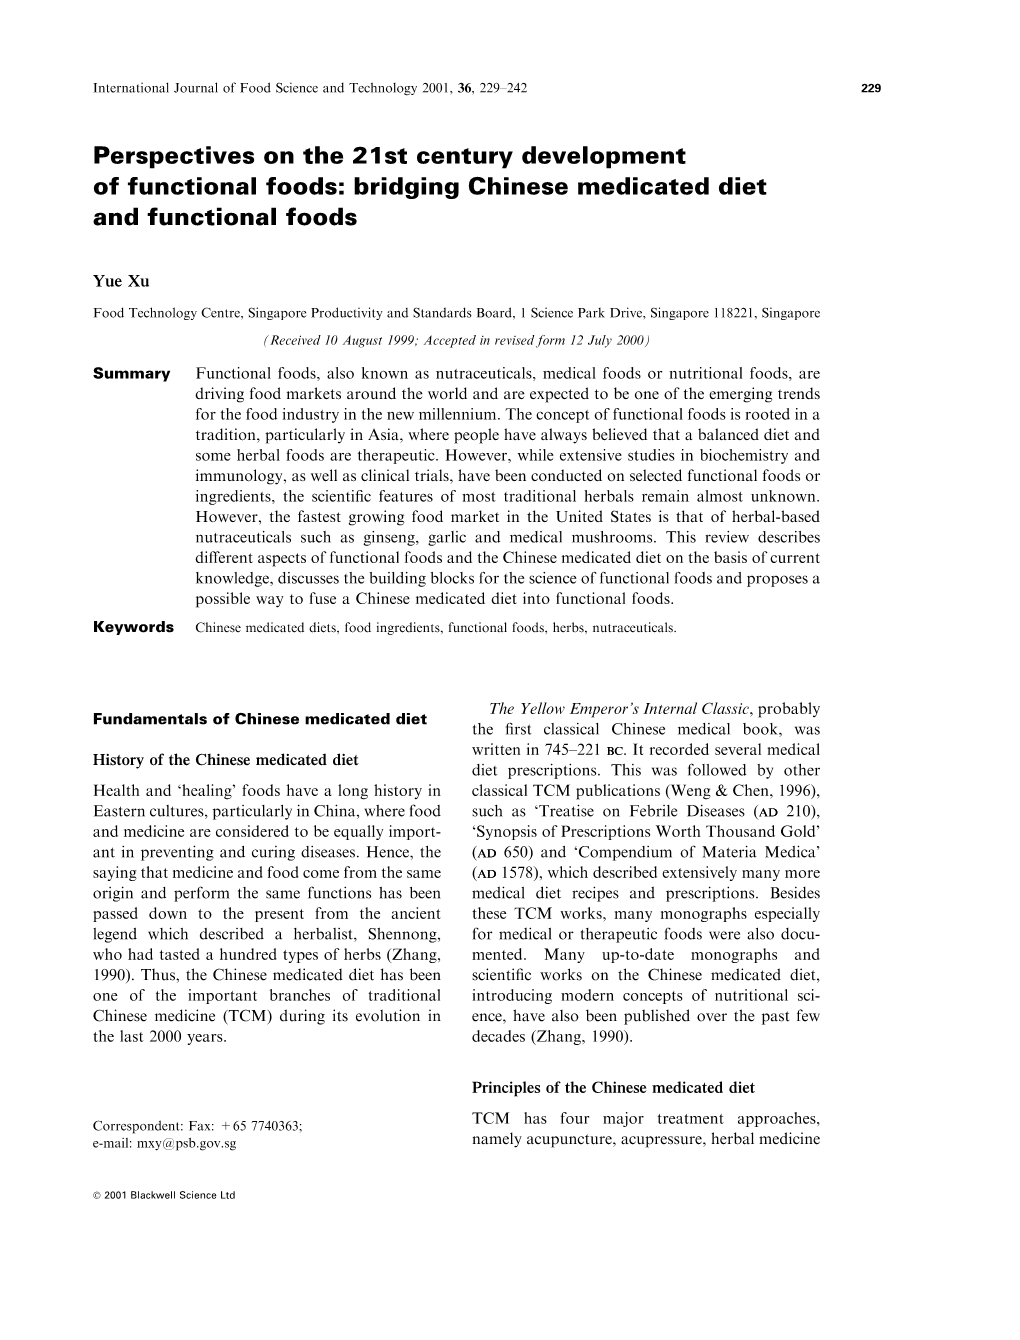 Bridging Chinese Medicated Diet and Functional Foods